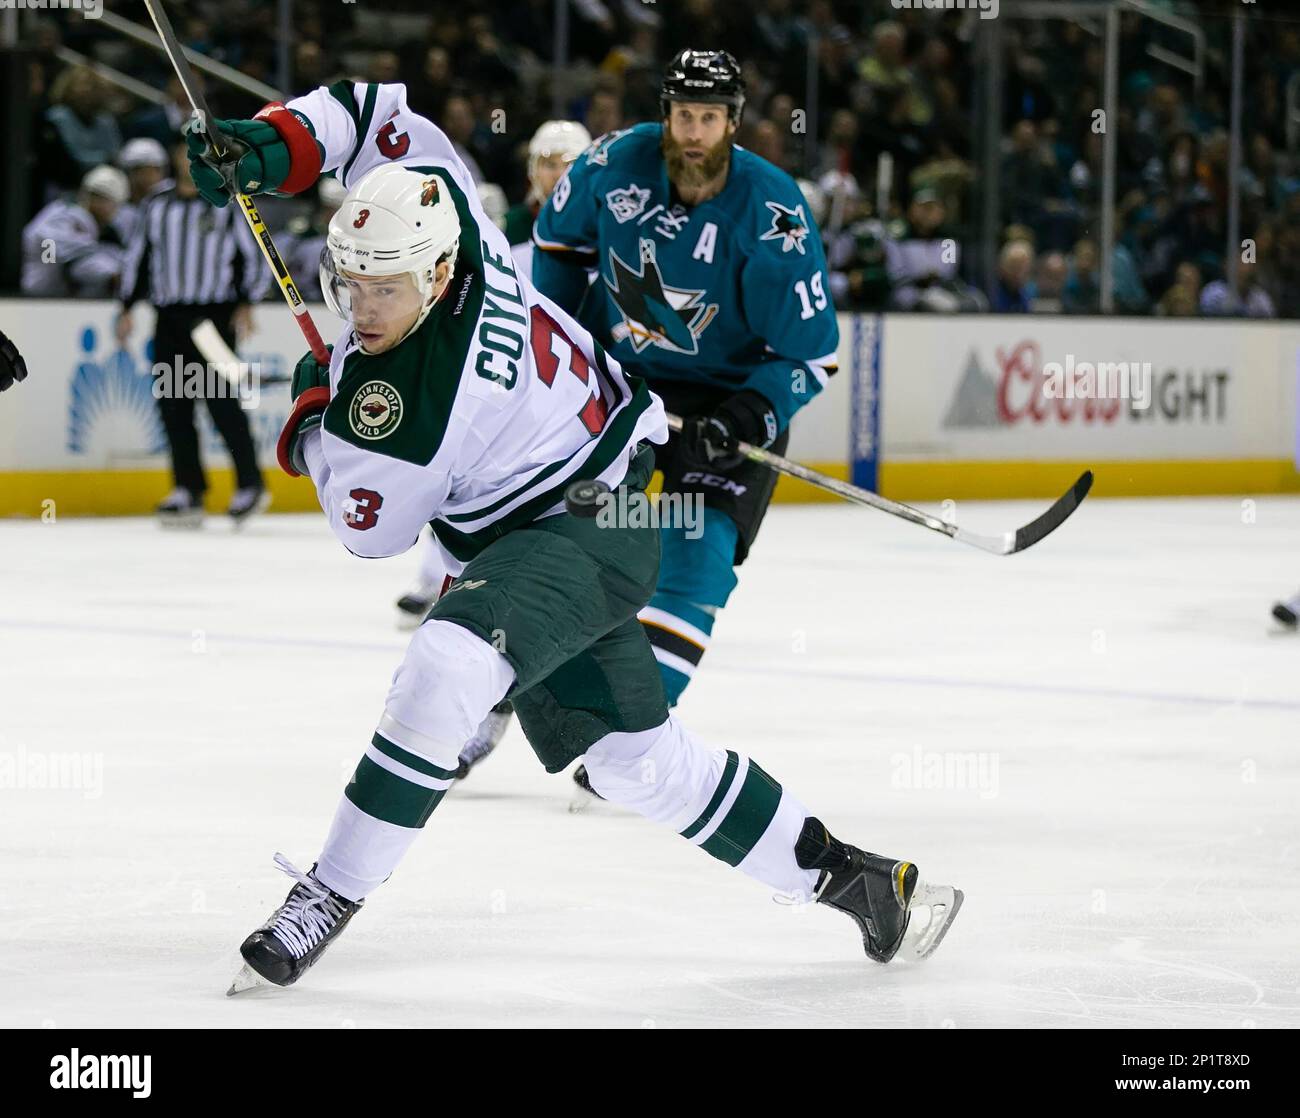 Jan 23, 2016: Minnesota Wild center Charlie Coyle (3) in action during the NHL hockey game between the Minnesota Wild and the San Jose Sharks at the SAP Center in San Jose, CA. The Sharks defeated the Wild 4-3. Damon Tarver/Cal Sport Media (Cal Sport Media via AP Images) Stock Photo